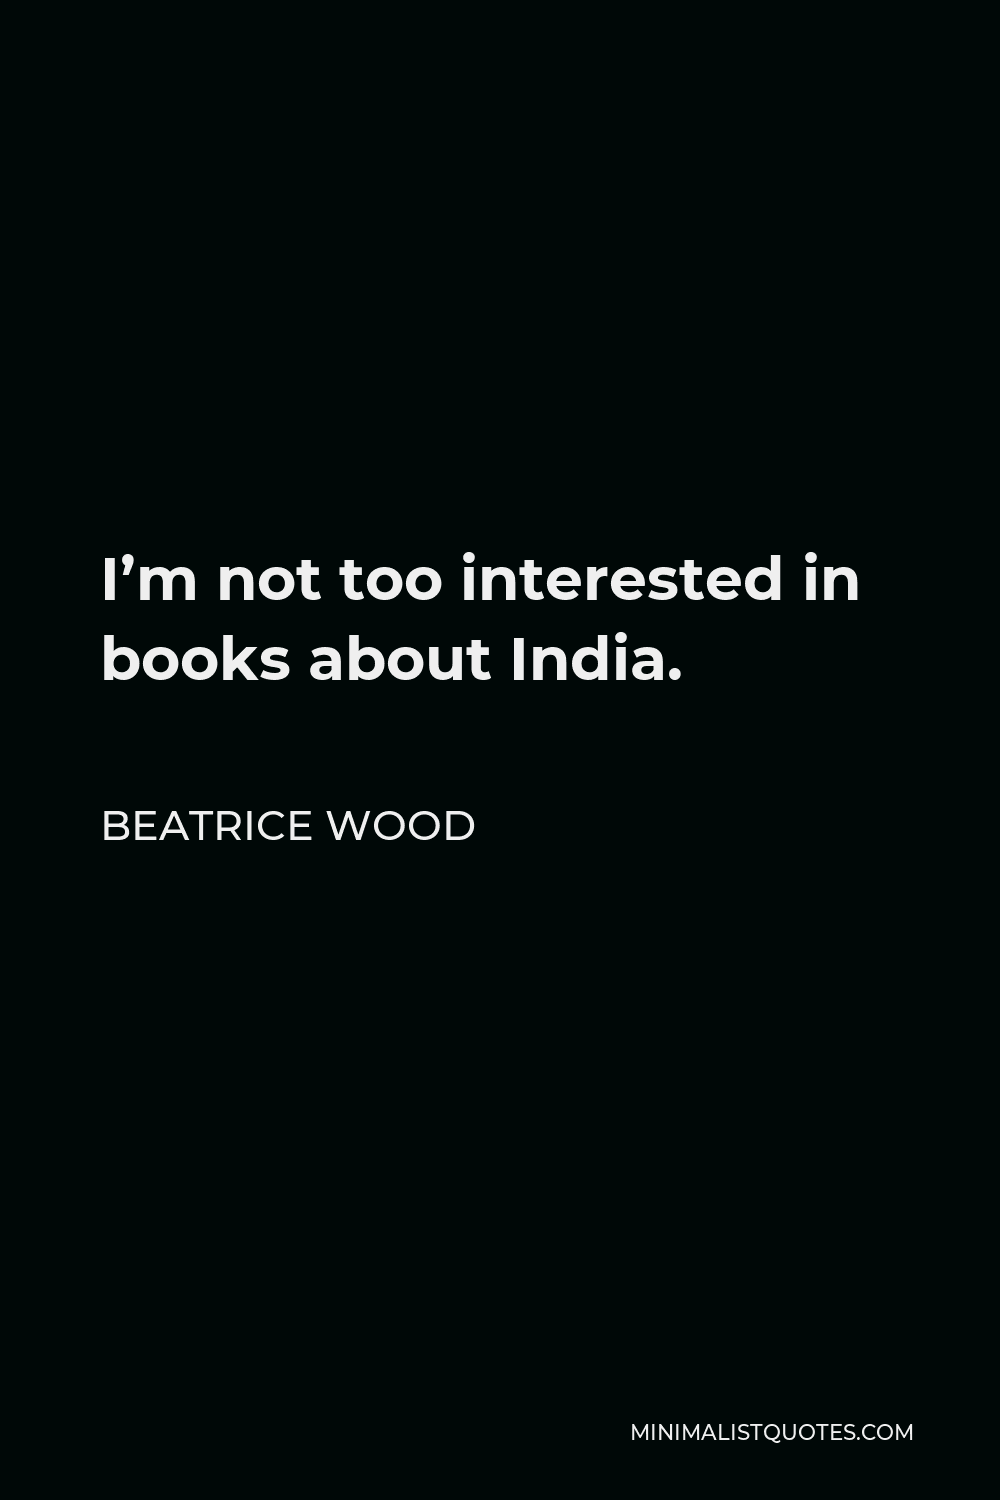 Beatrice Wood Quote - I’m not too interested in books about India.